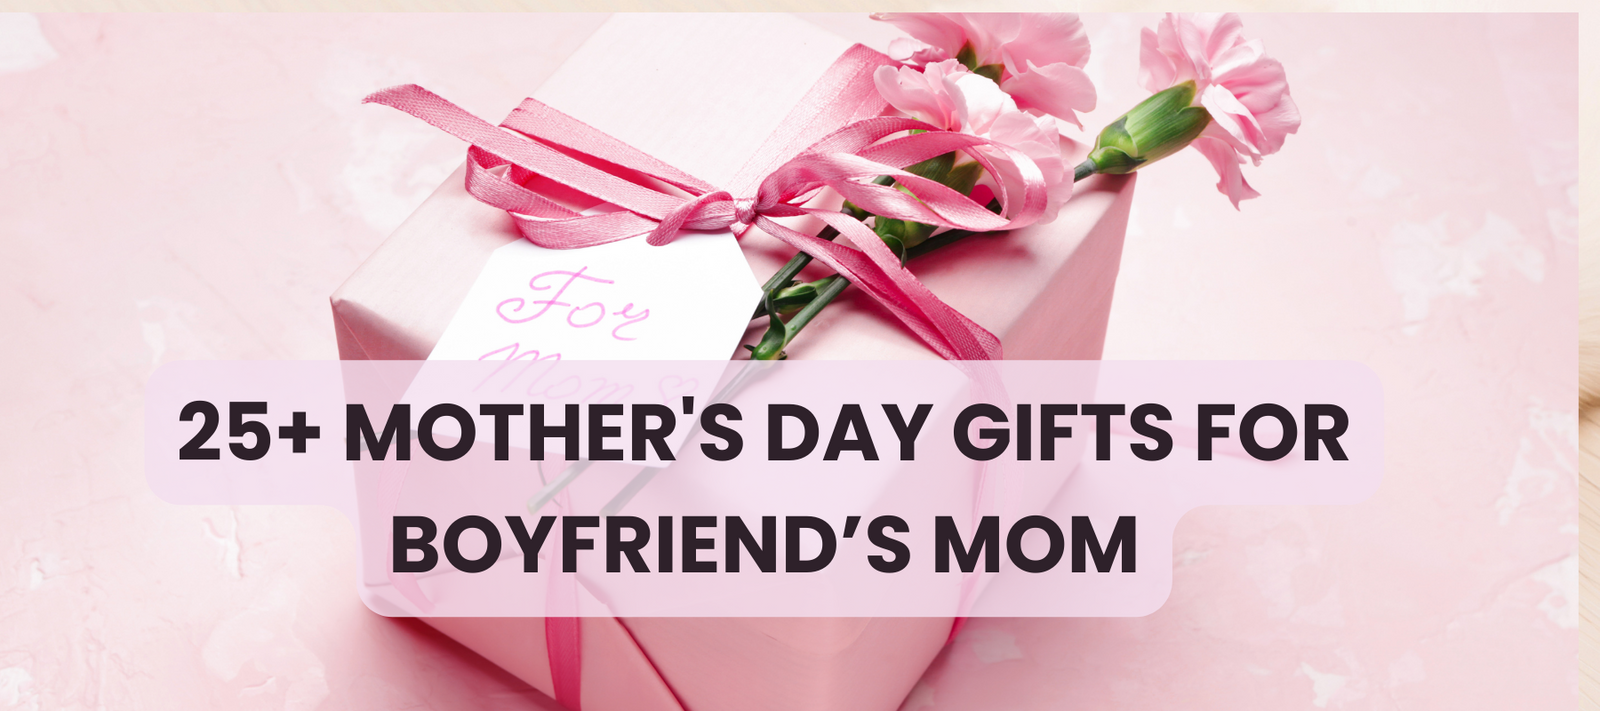 Best Mother's Day Gifts For Boyfriend's Mom